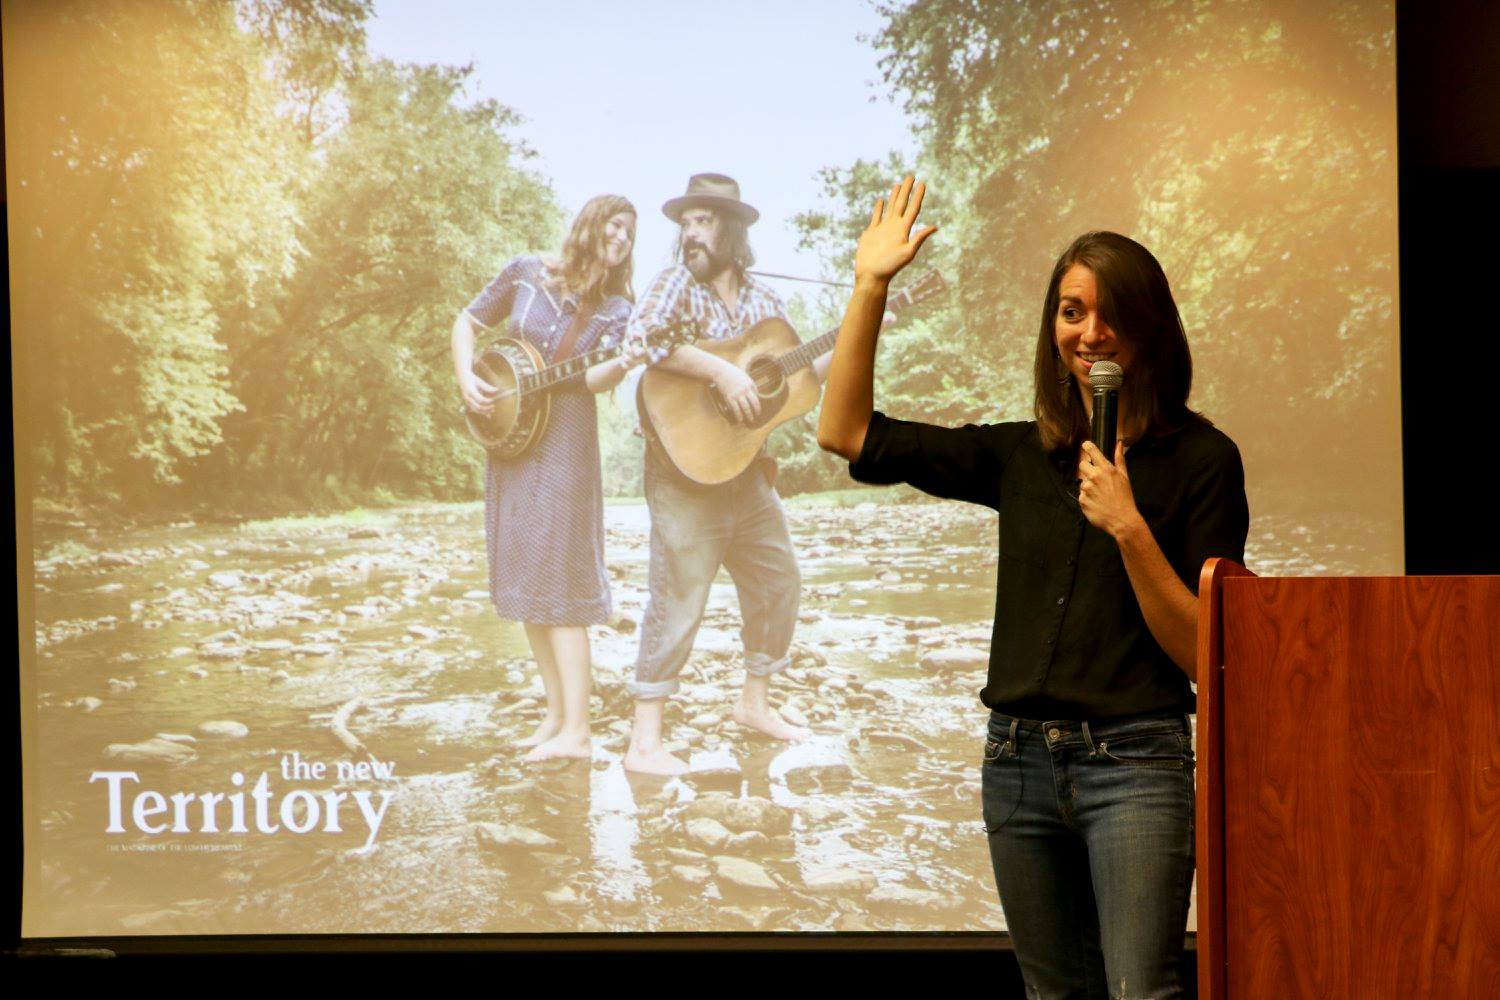 woman holding hand up in front of a screen and podium. The woman is white with brown shoulder-length hair and is wearing jeans and a black button-up shirt. The screen has a two-person string band playing in a creek.